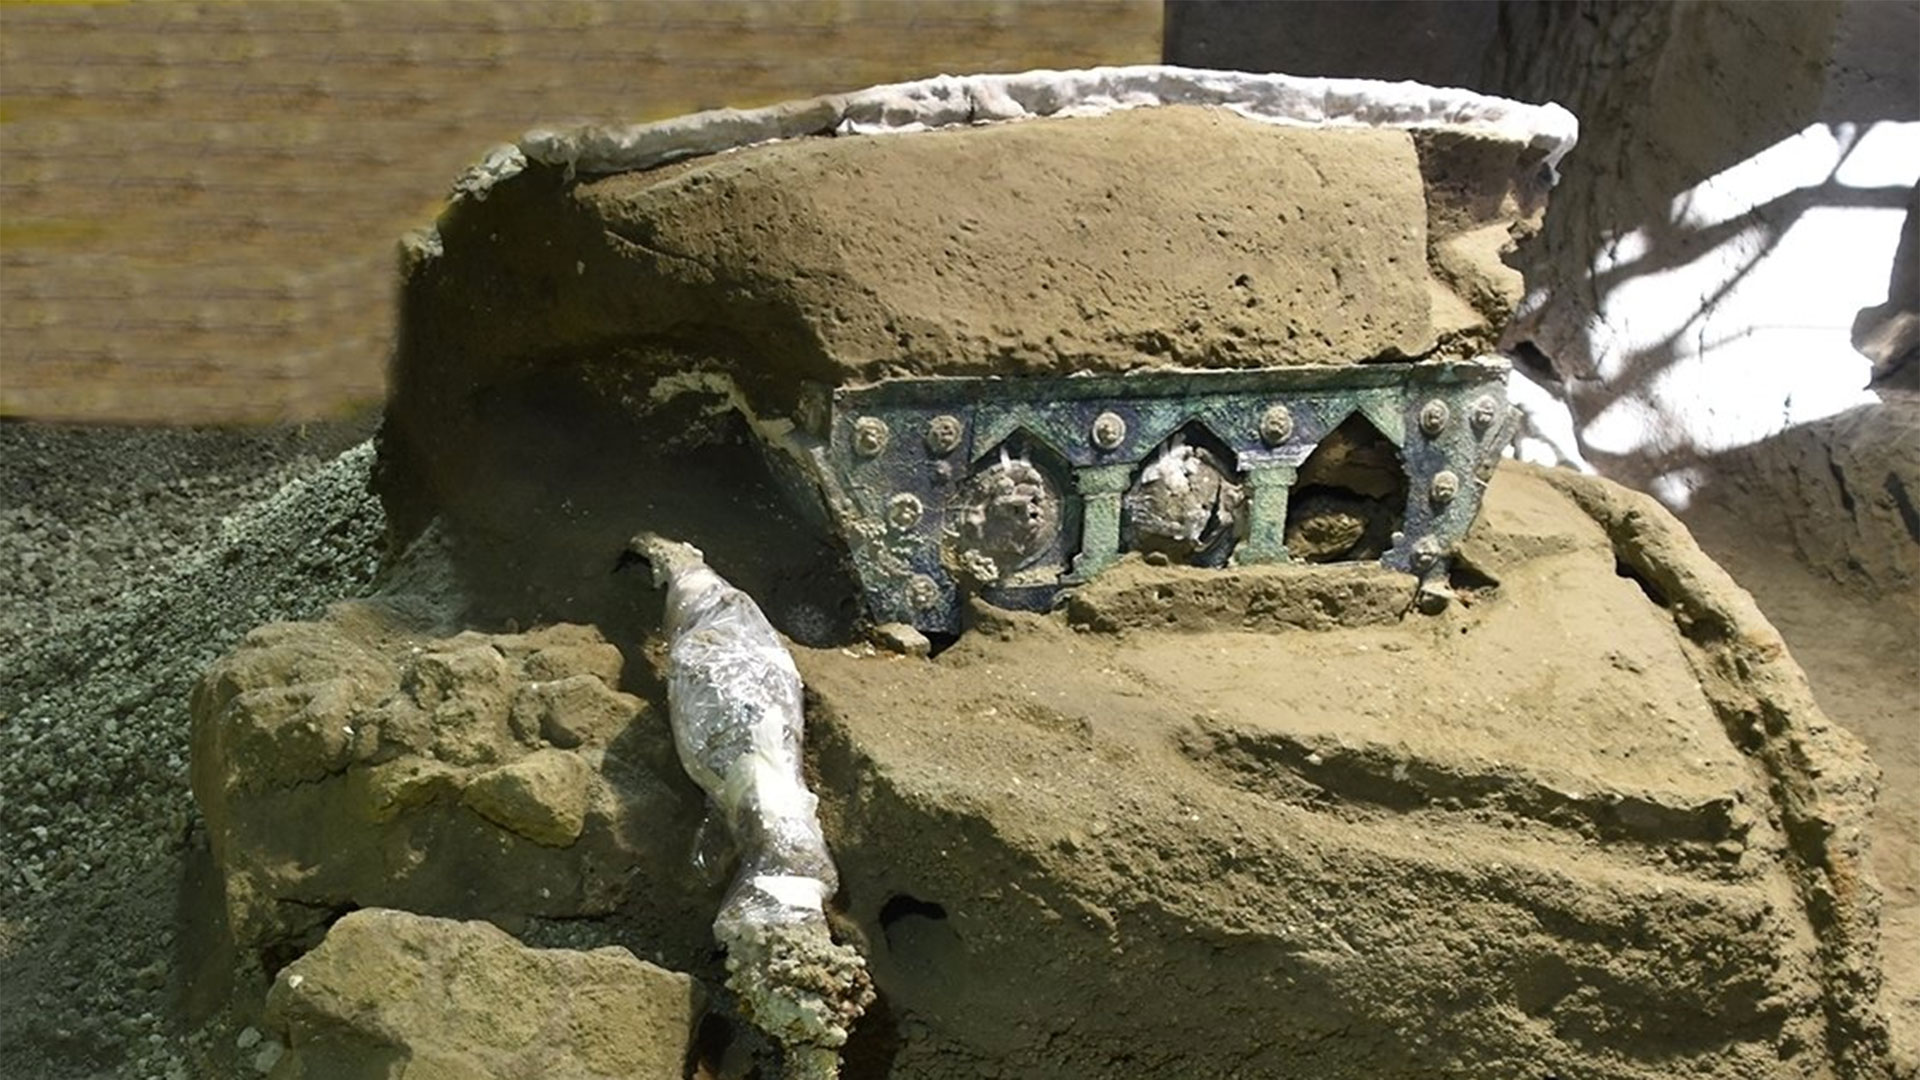 A well-preserved chariot discovered in Pompeii has been described as an "extraordinary find" and has iron wheels, bronze and tin decorations and mineralized wood.